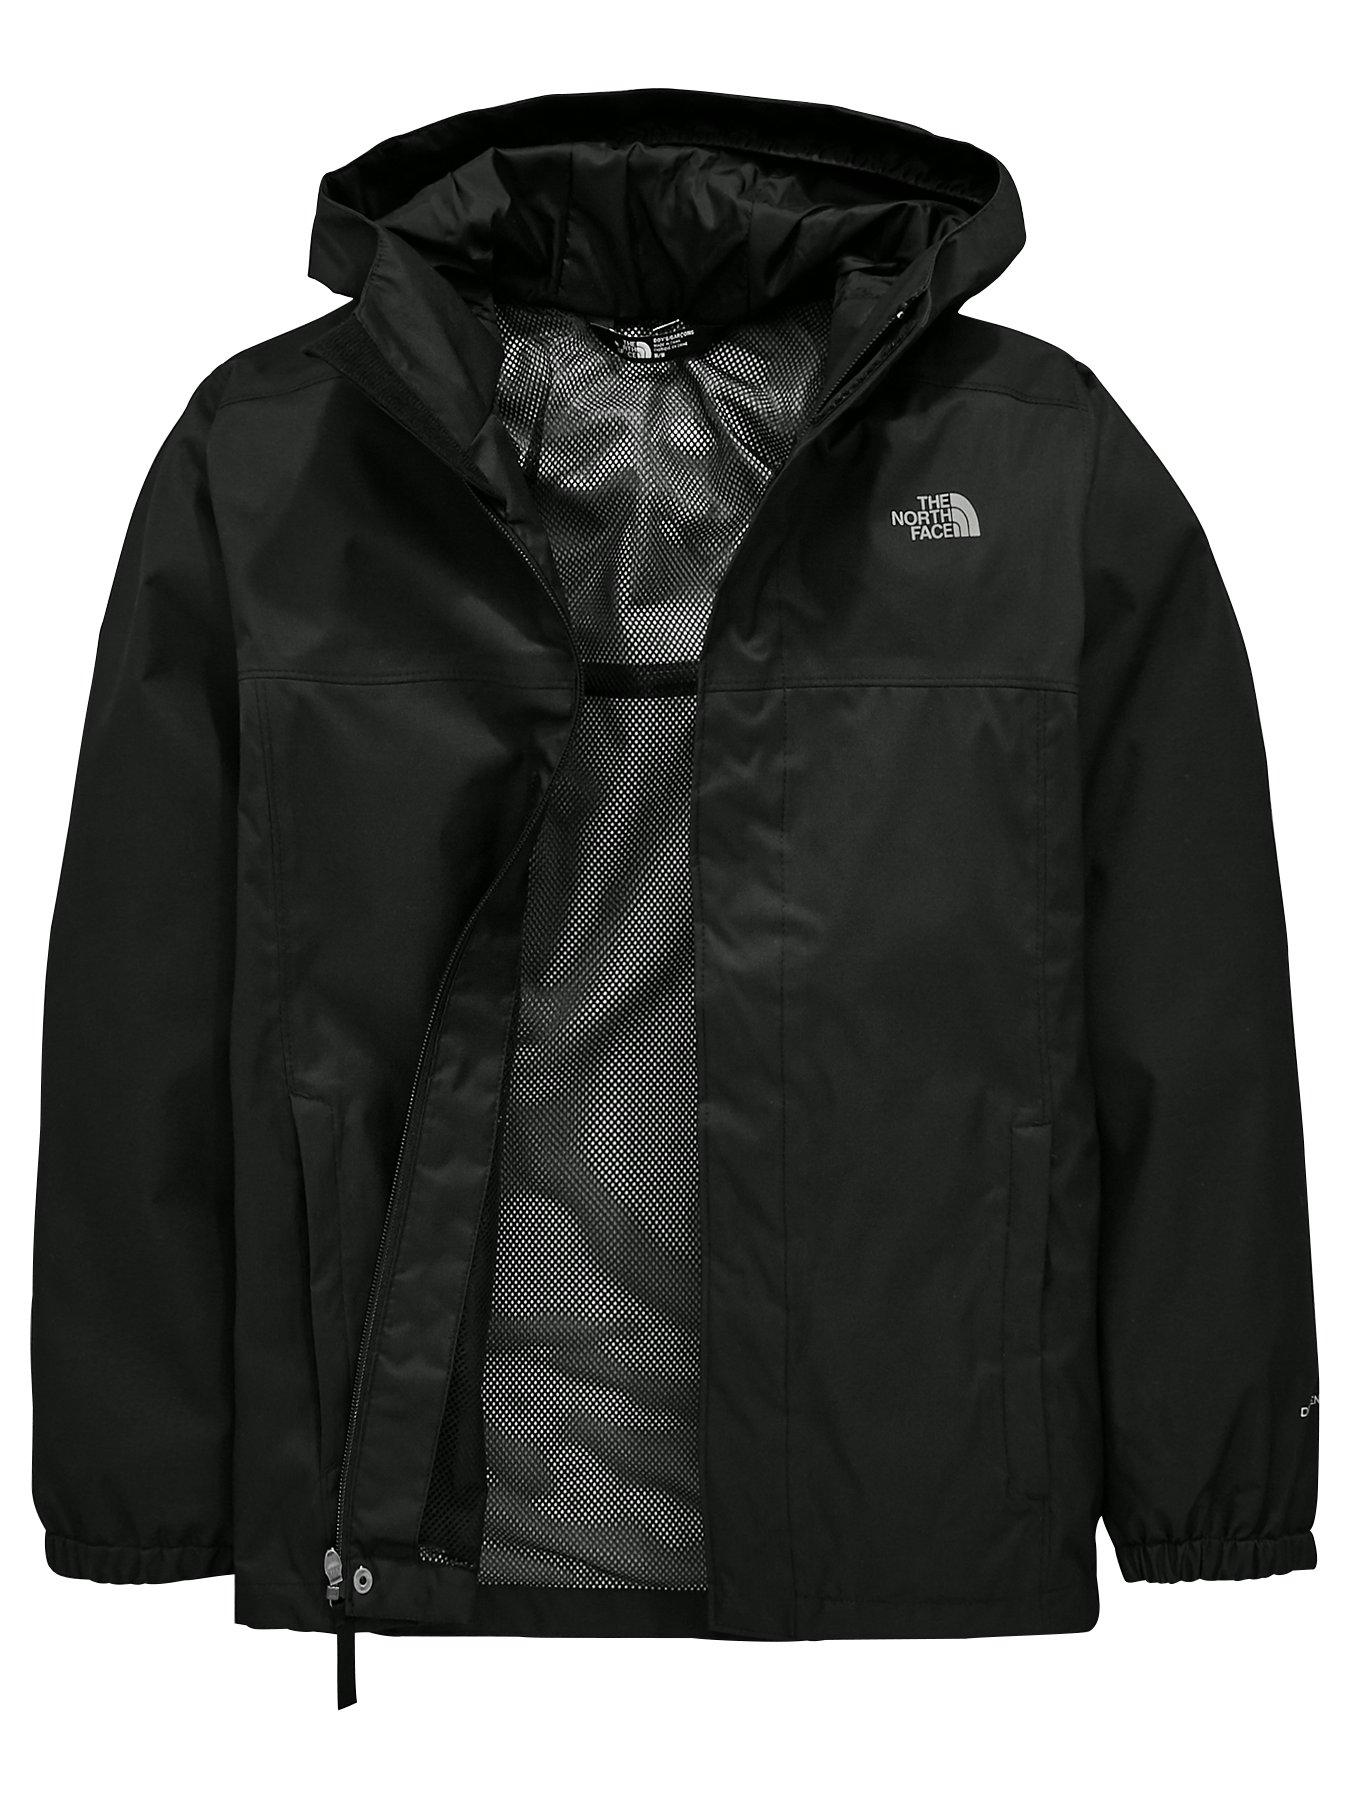 the north face boy jacket